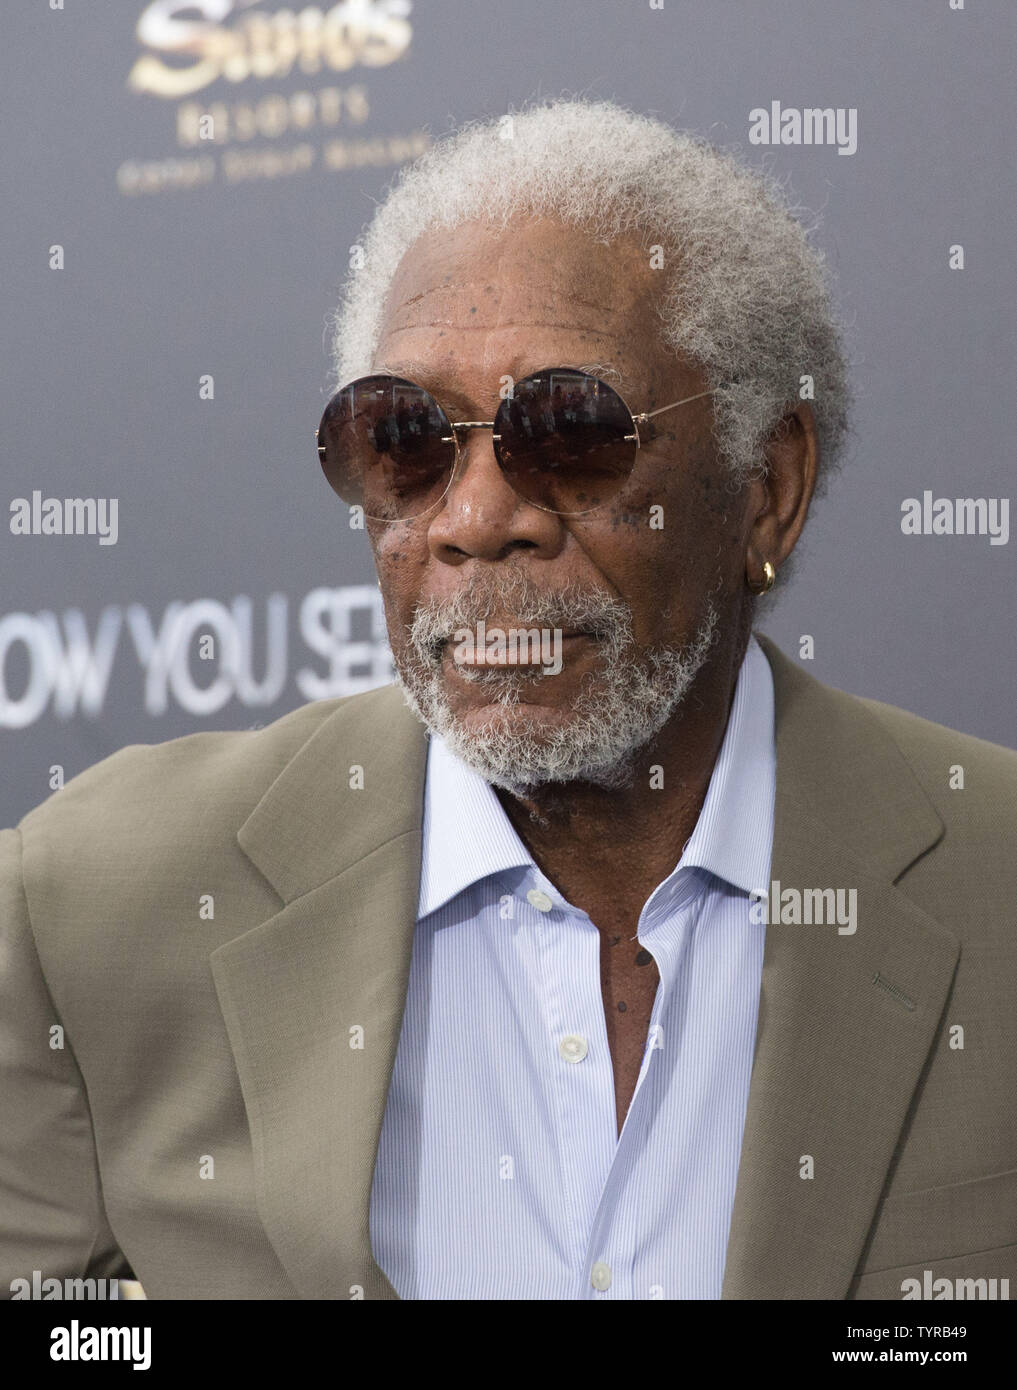 Morgan Freeman arrives at the 'Now You See Me 2' world premiere, Monday, June 6, 2016 in New York City.   Photo by Bryan R. Smith/UPI Stock Photo